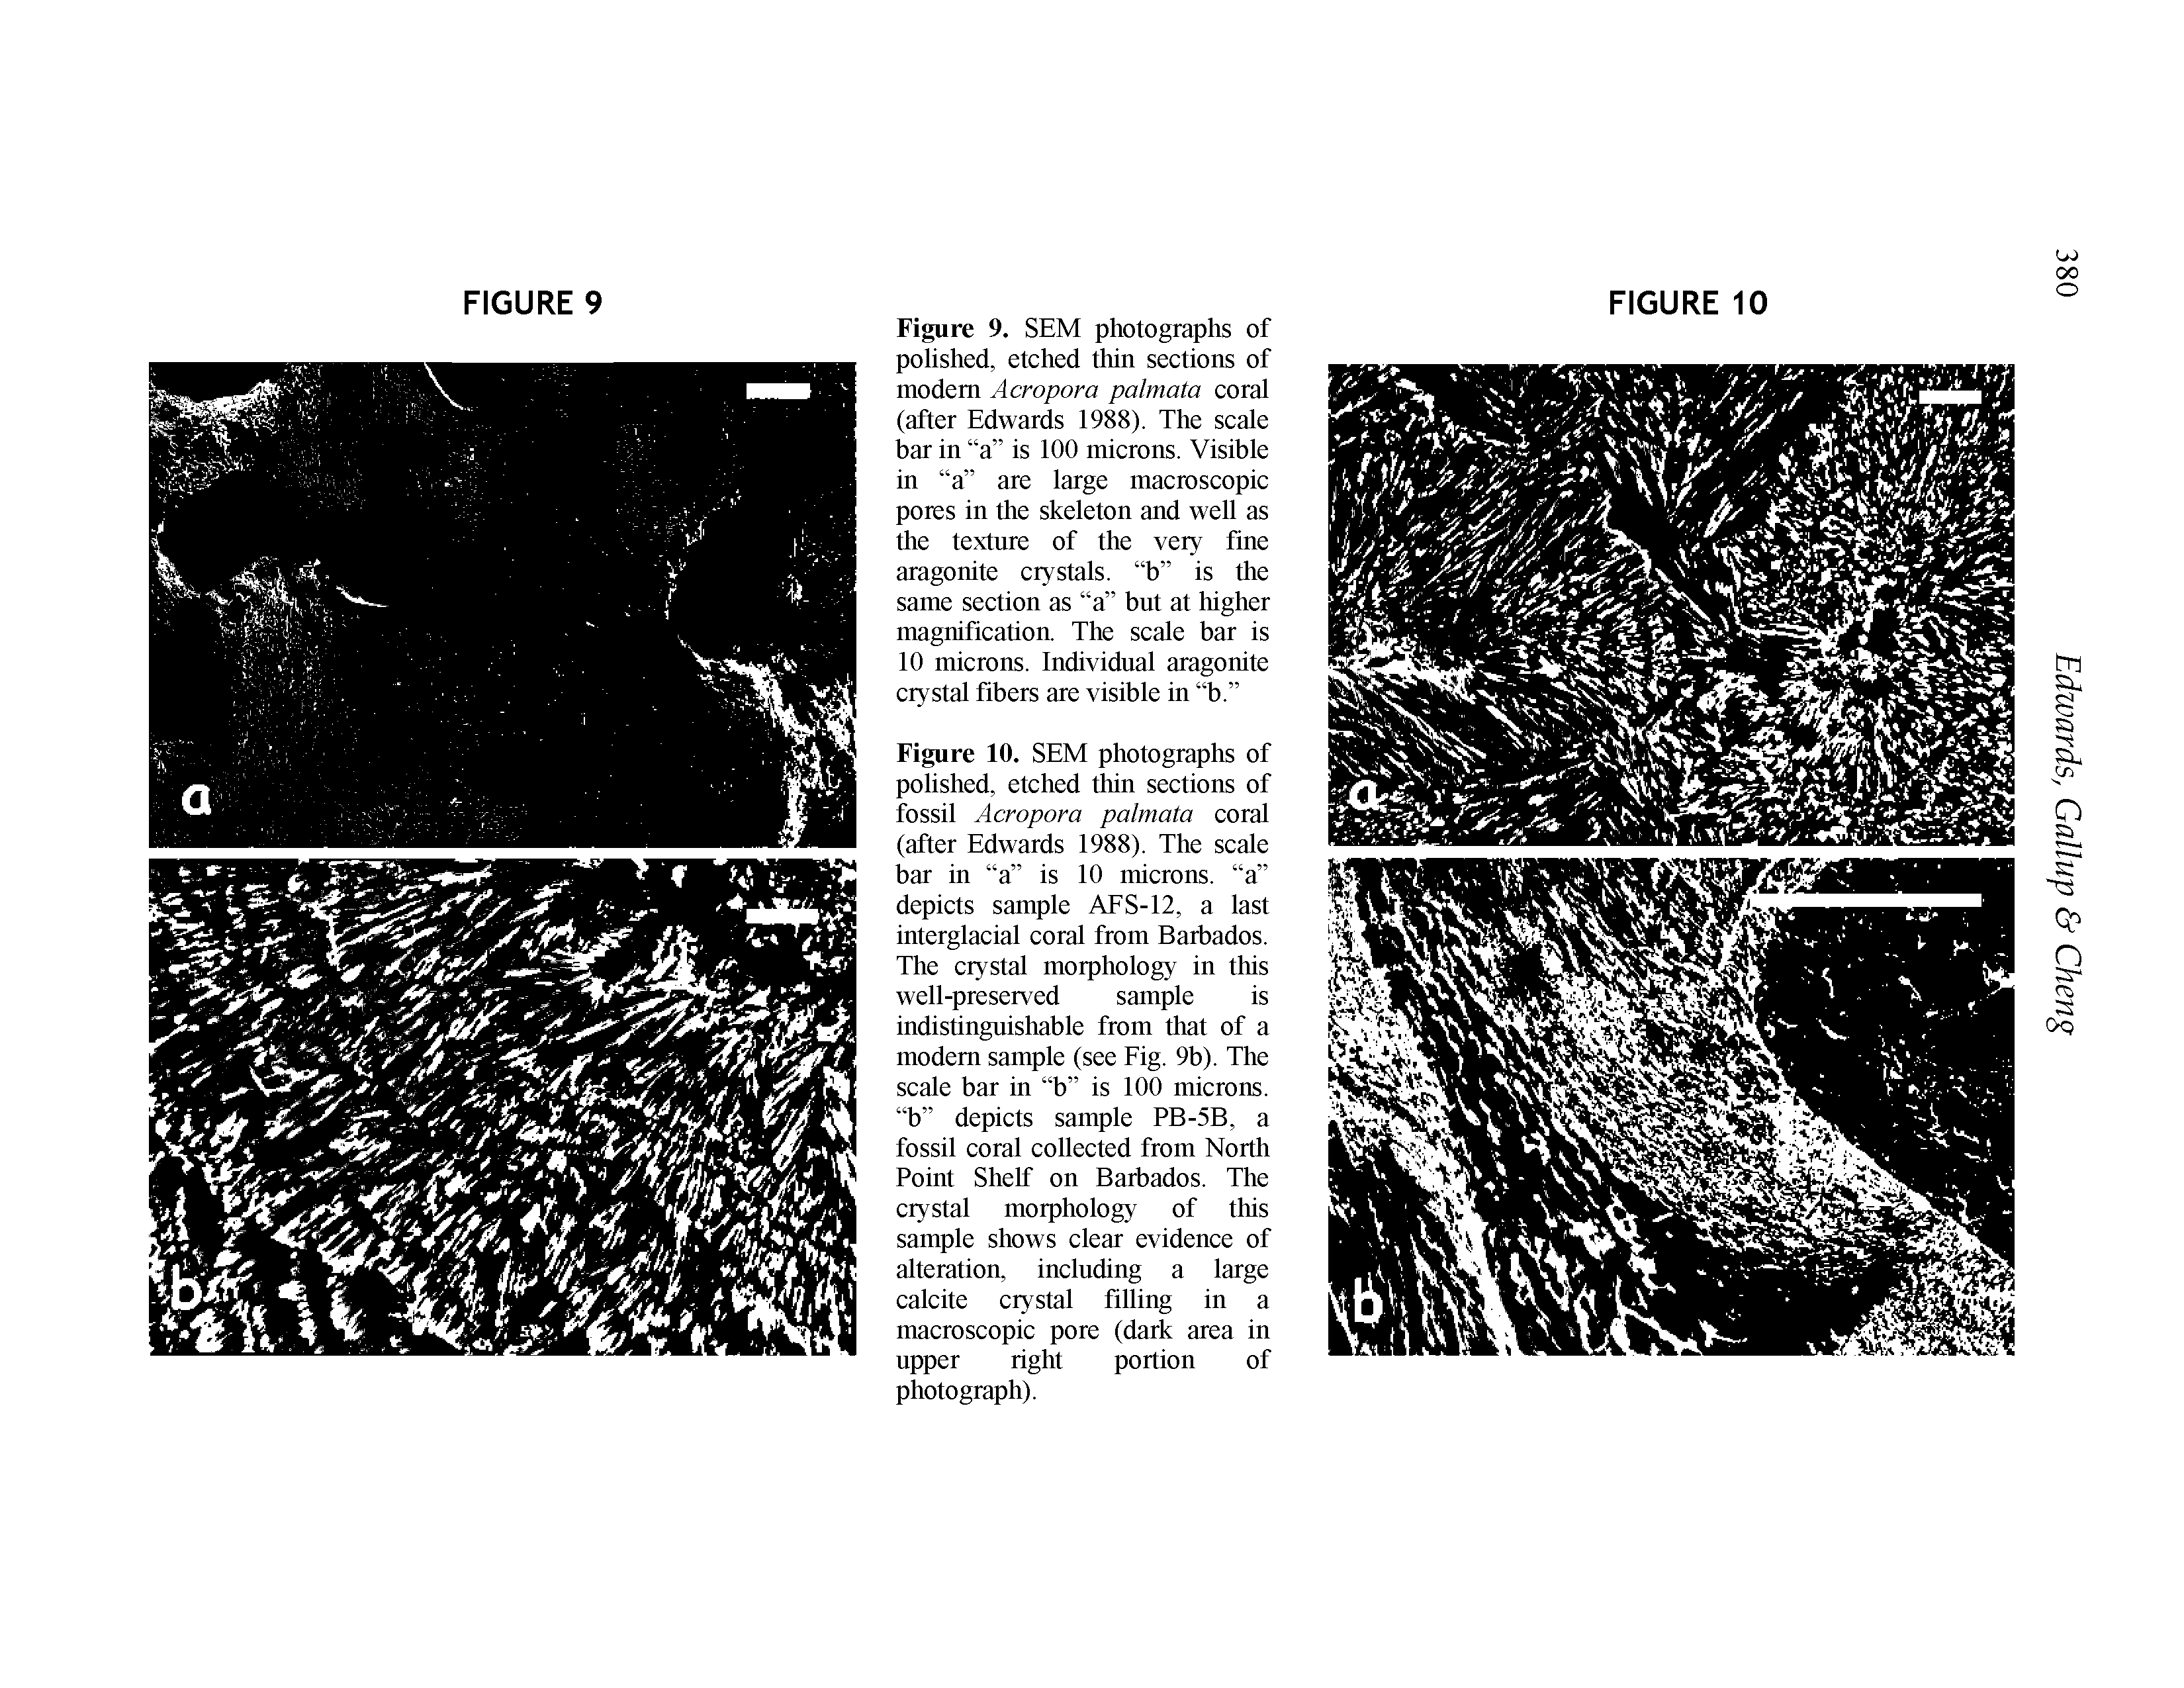 Figure 10. SEM photographs of polished, etched thin sections of fossil Acropora palmata coral (after Edwards 1988). The scale bar in a is 10 microns, a depicts sample AFS-12, a last interglacial coral from Barbados. The crystal morphology in this well-preserved sample is indistingnishable from that of a modem sample (see Fig. 9b). The scale bar in b is 100 microns, b depicts sample PB-5B, a fossil coral collected from North Point Shelf on Barbados. The crystal morphology of this sample shows clear evidence of alteration, inclnding a large calcite crystal filling in a macroscopic pore (dark area in npper right portion of photograph).